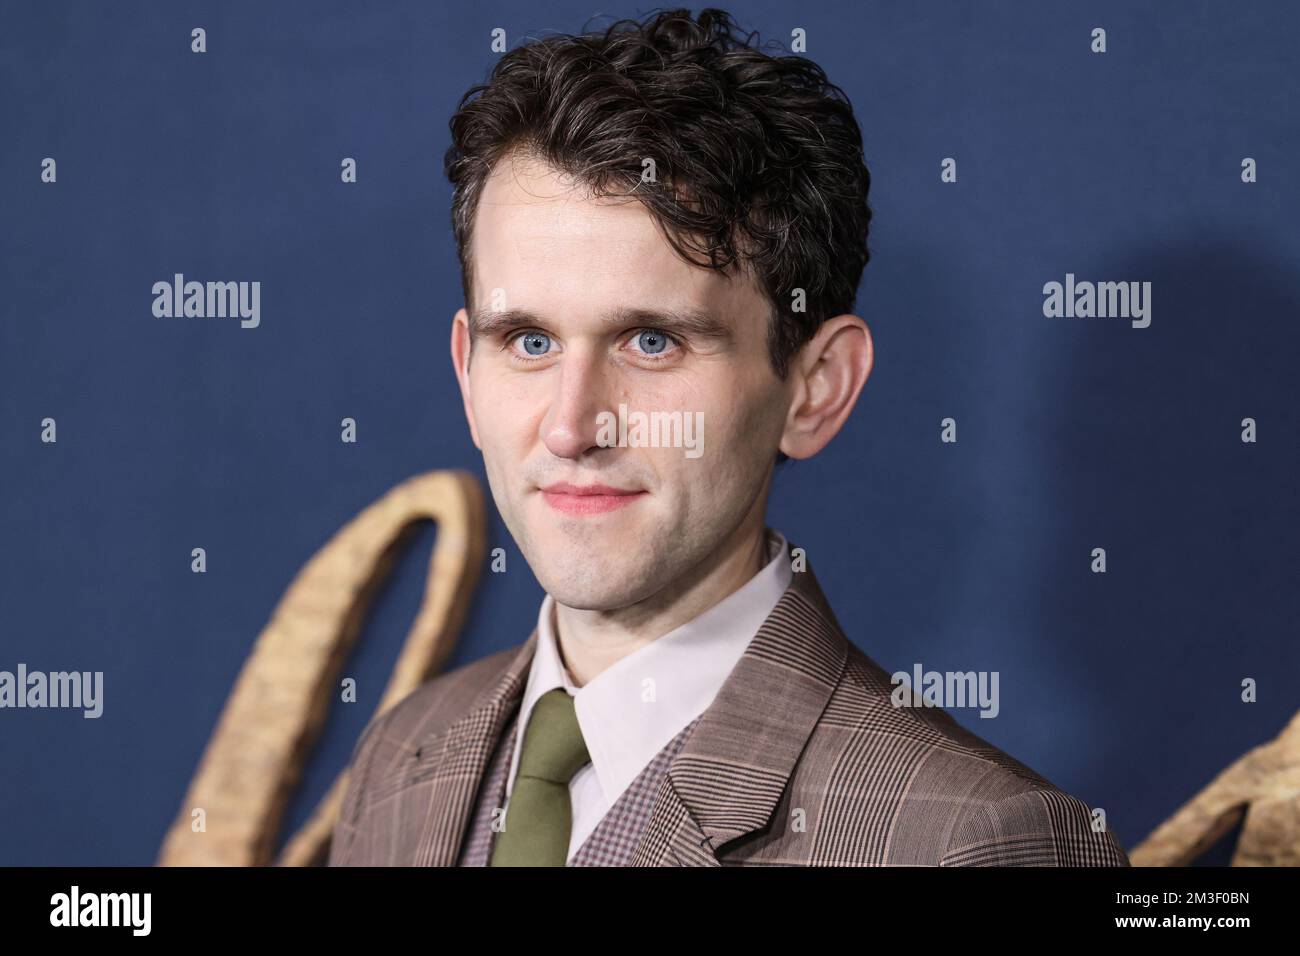 https://c8.alamy.com/comp/2M3F0BN/los-angeles-united-states-14th-dec-2022-los-angeles-california-usa-december-14-english-actor-harry-melling-arrives-at-the-los-angeles-premiere-of-netflixs-the-pale-blue-eye-held-at-the-directors-guild-of-america-theater-complex-on-december-14-2022-in-los-angeles-california-united-states-photo-by-xavier-collinimage-press-agency-credit-image-press-agencyalamy-live-news-2M3F0BN.jpg